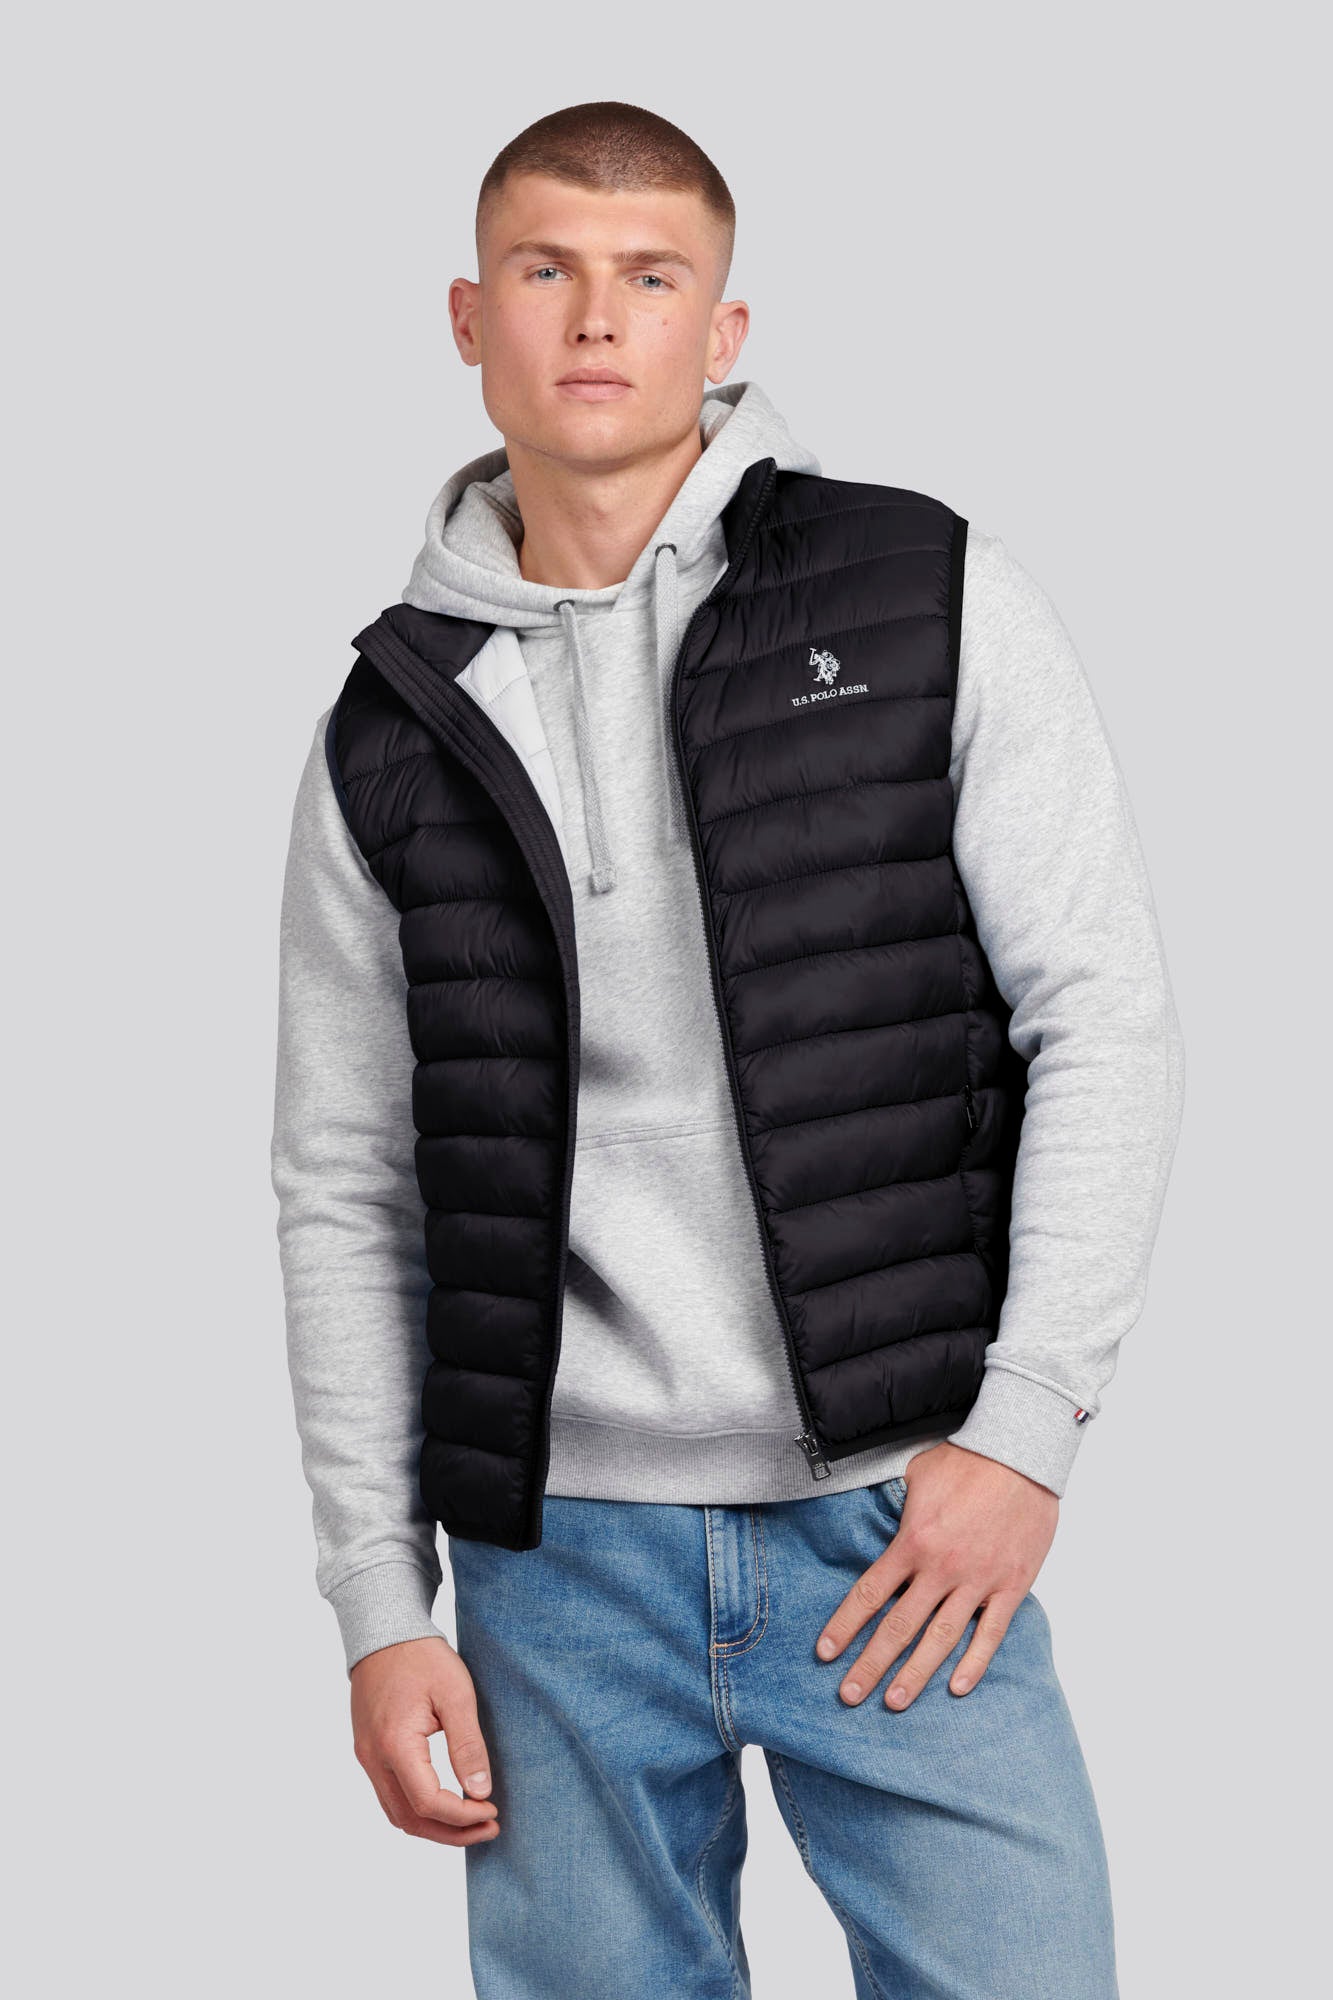 U.S. Polo Assn. Mens Bound Quilted Gilet in Black Bright White DHM